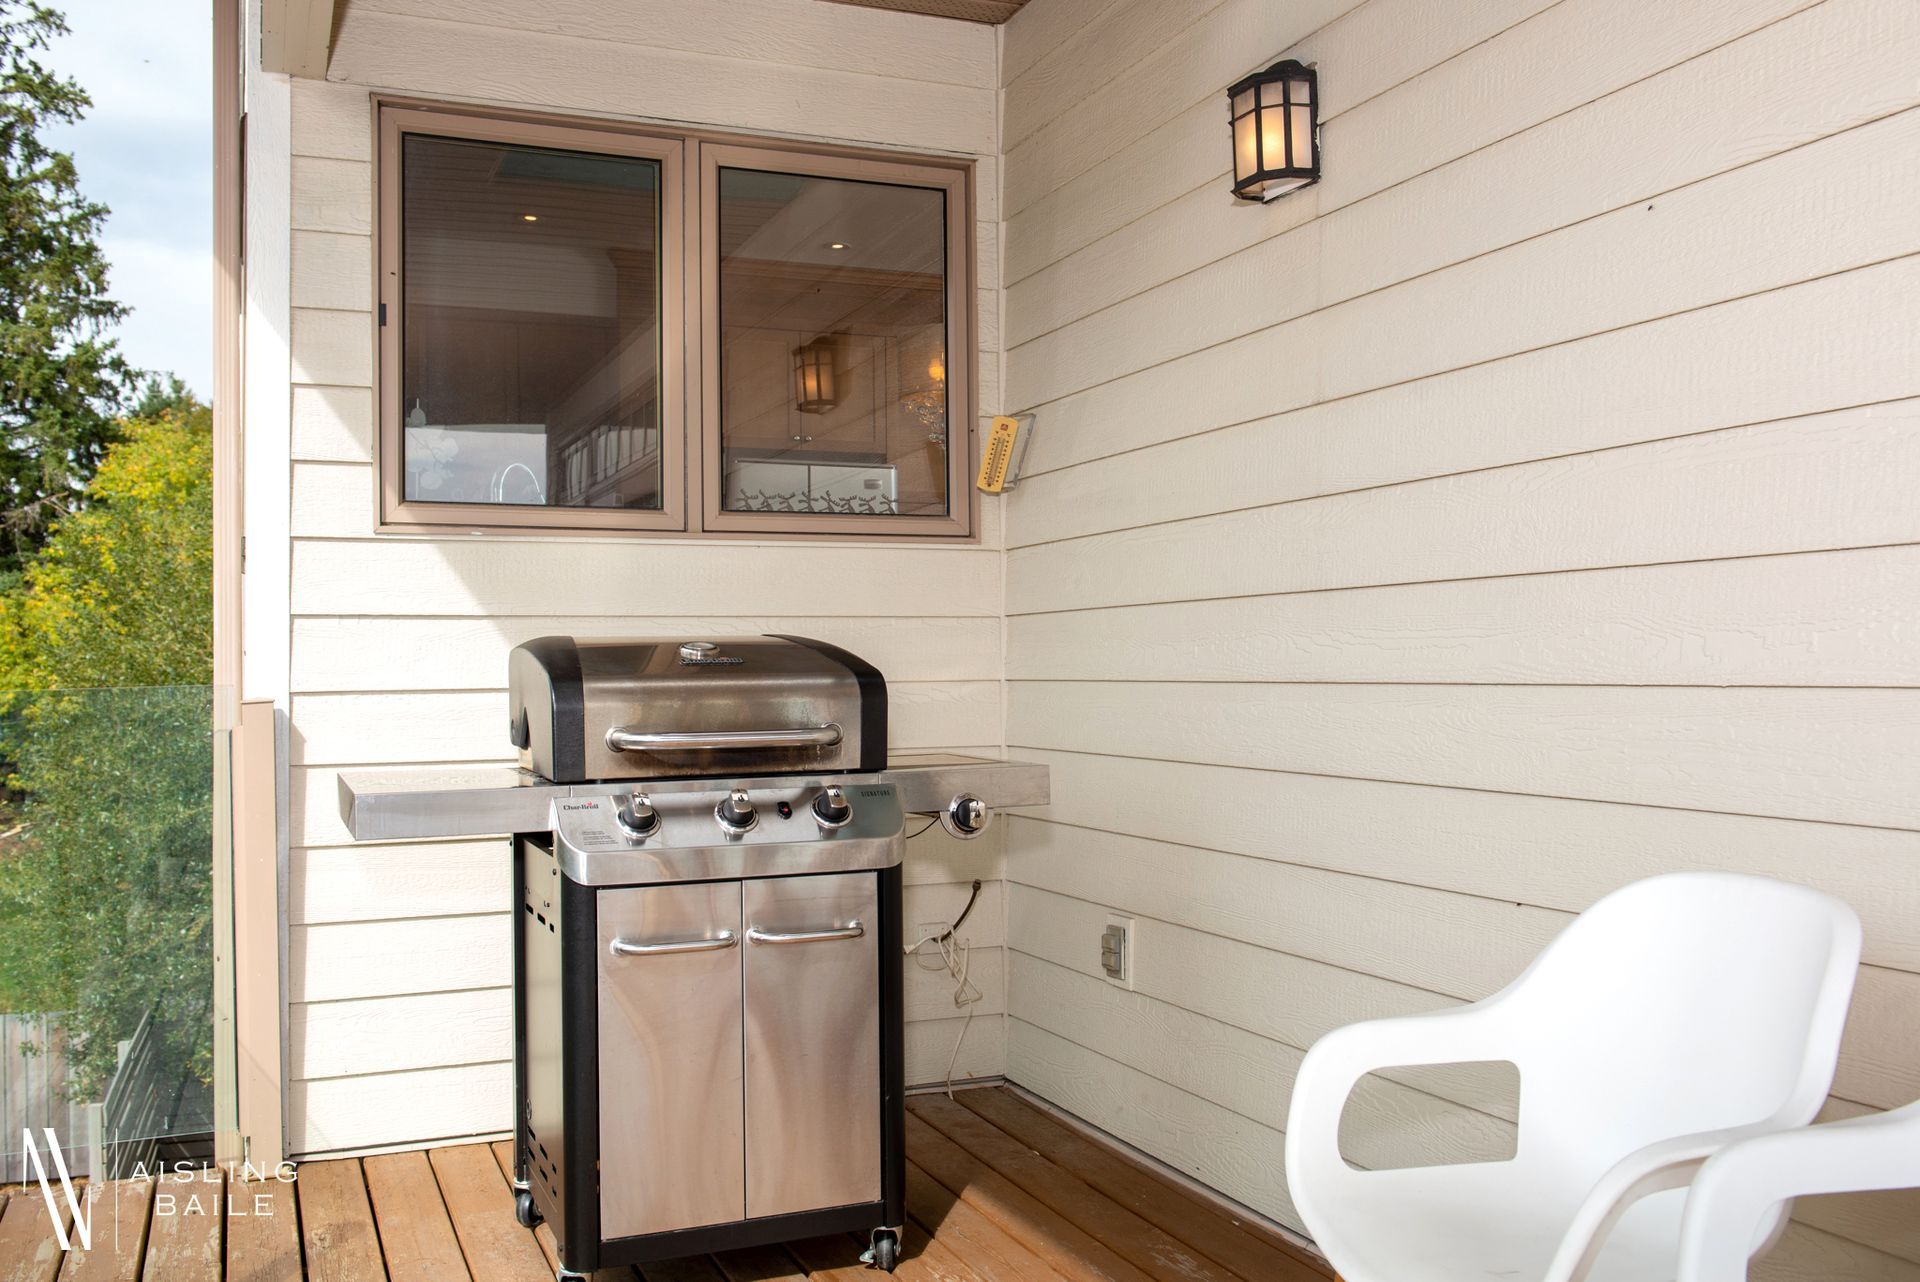 Private patio swing & BBQ with lake and mountain views from Central Elegance, an Invermere BC Vacation Rental hosted by Aisling Baile Property Management.